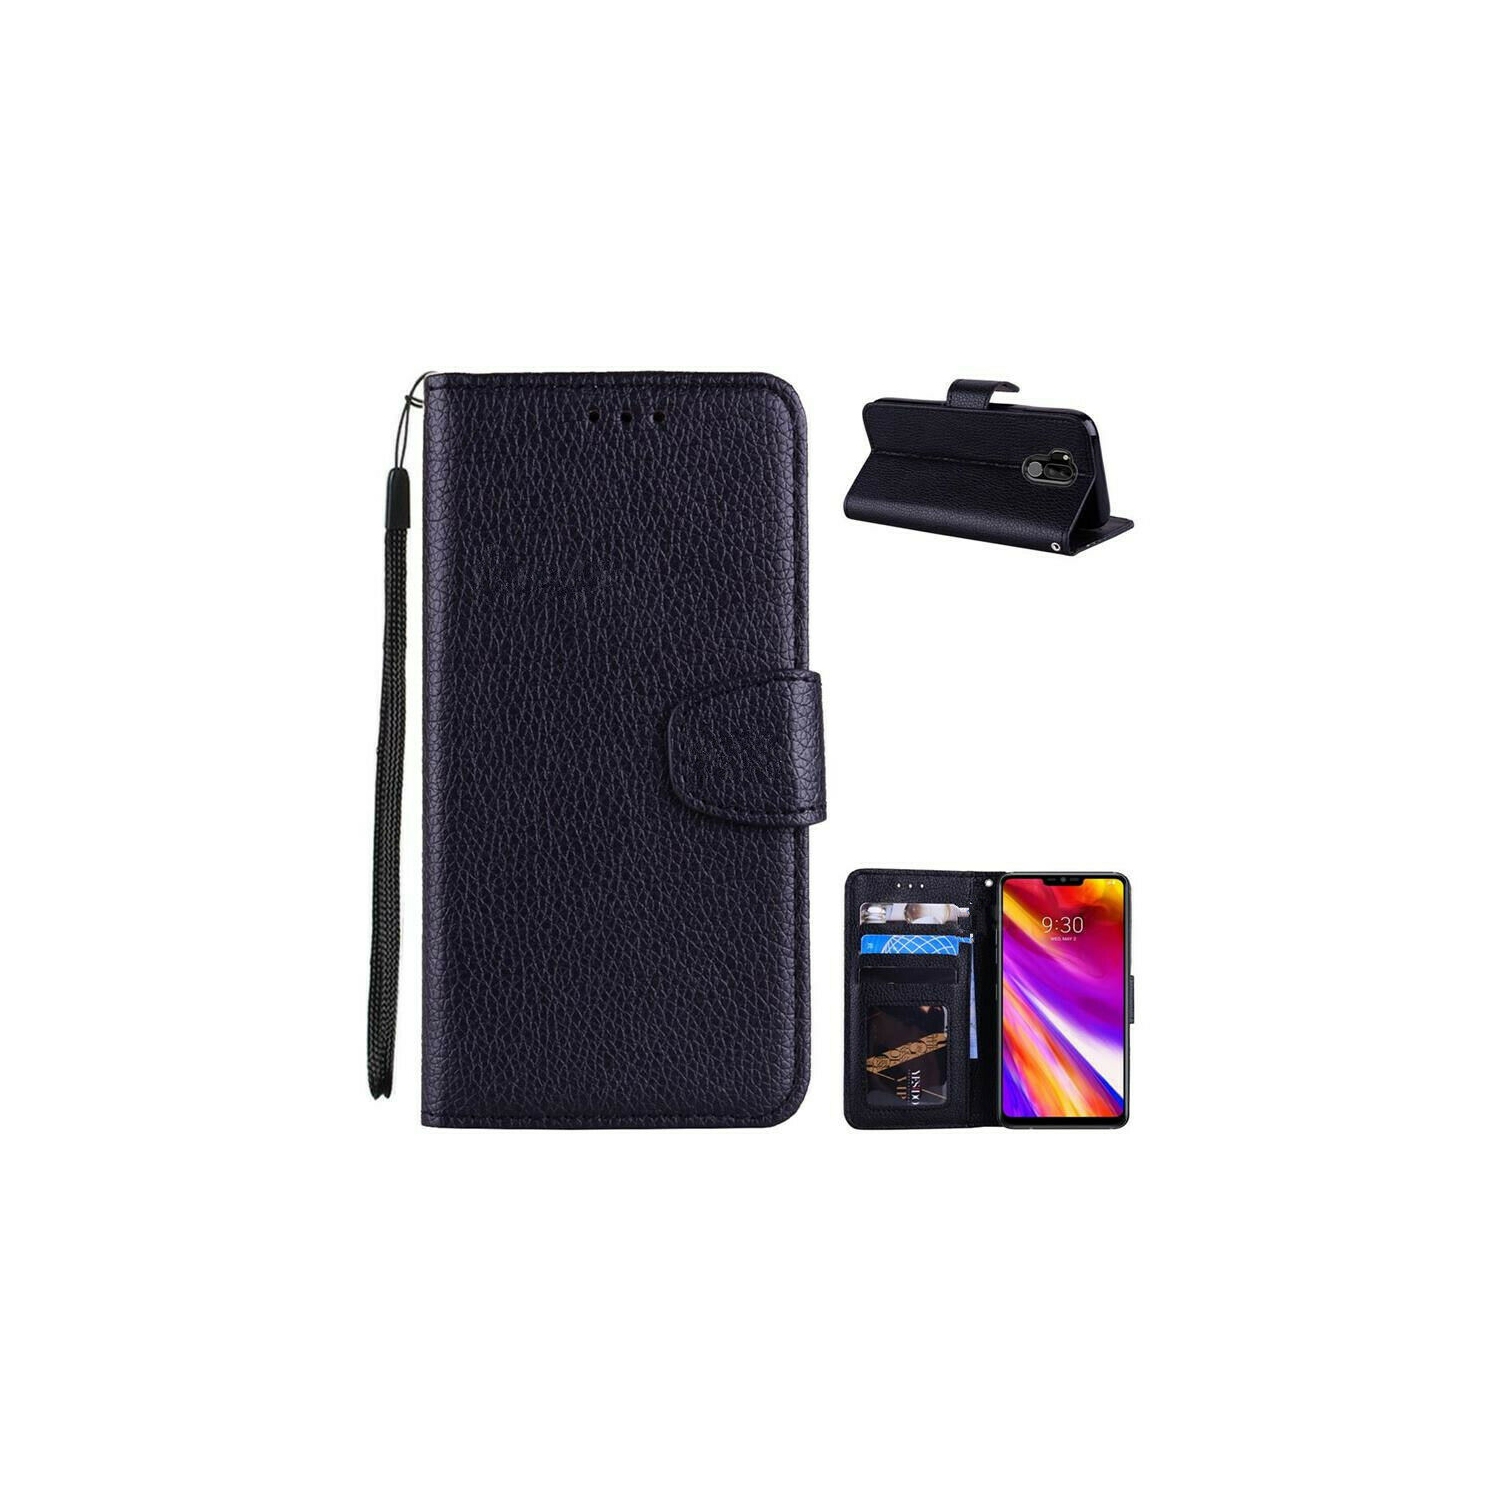 【CSmart】 Magnetic Card Slot Leather Folio Wallet Flip Case Cover for LG G7 ThinQ / G7 One, Black